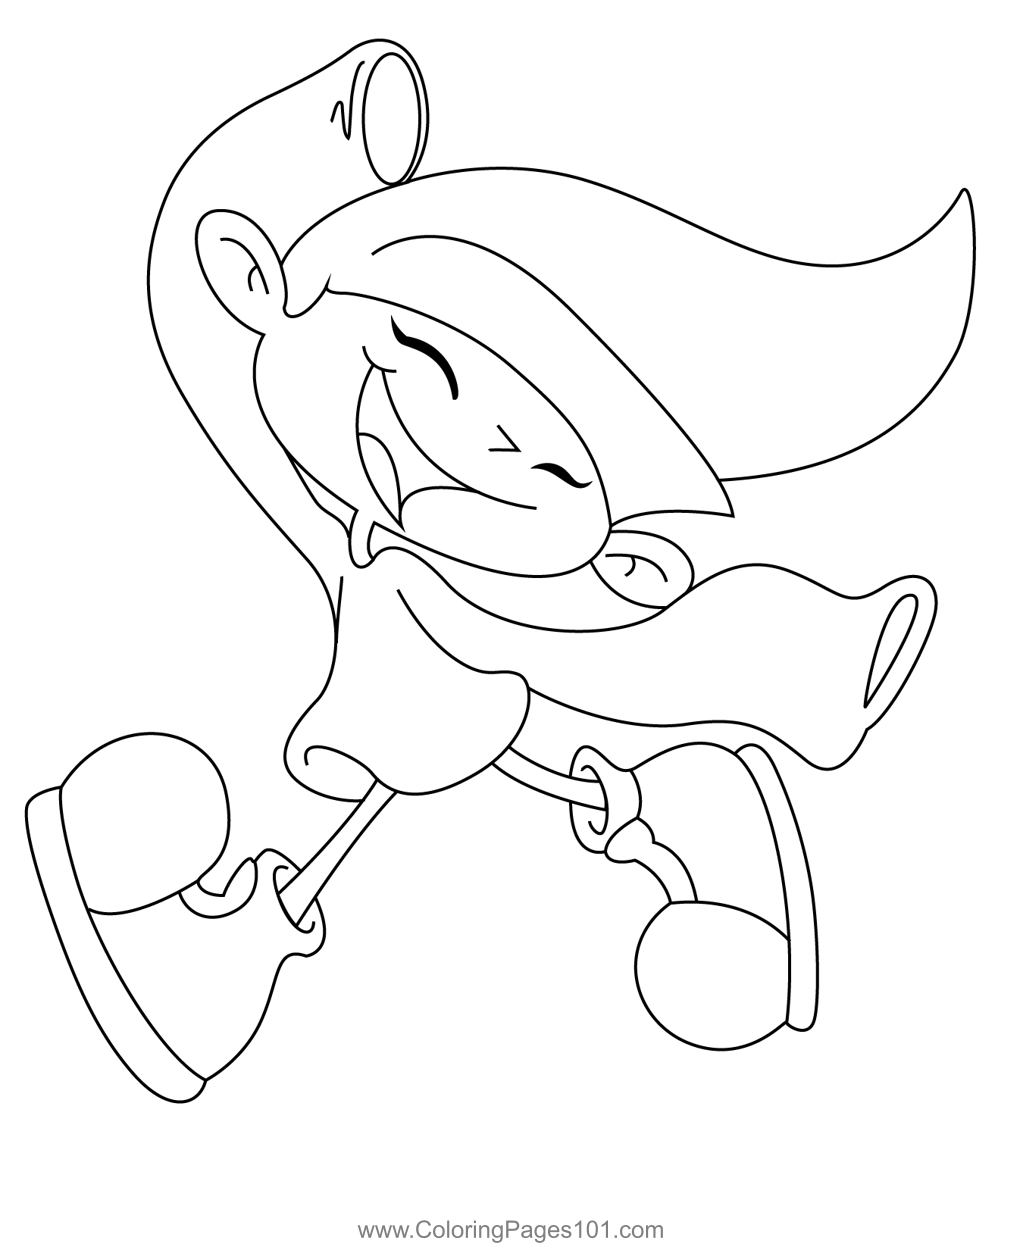 Happy Numbuh 3 Coloring Page for Kids - Free Codename: Kids Next Door ...